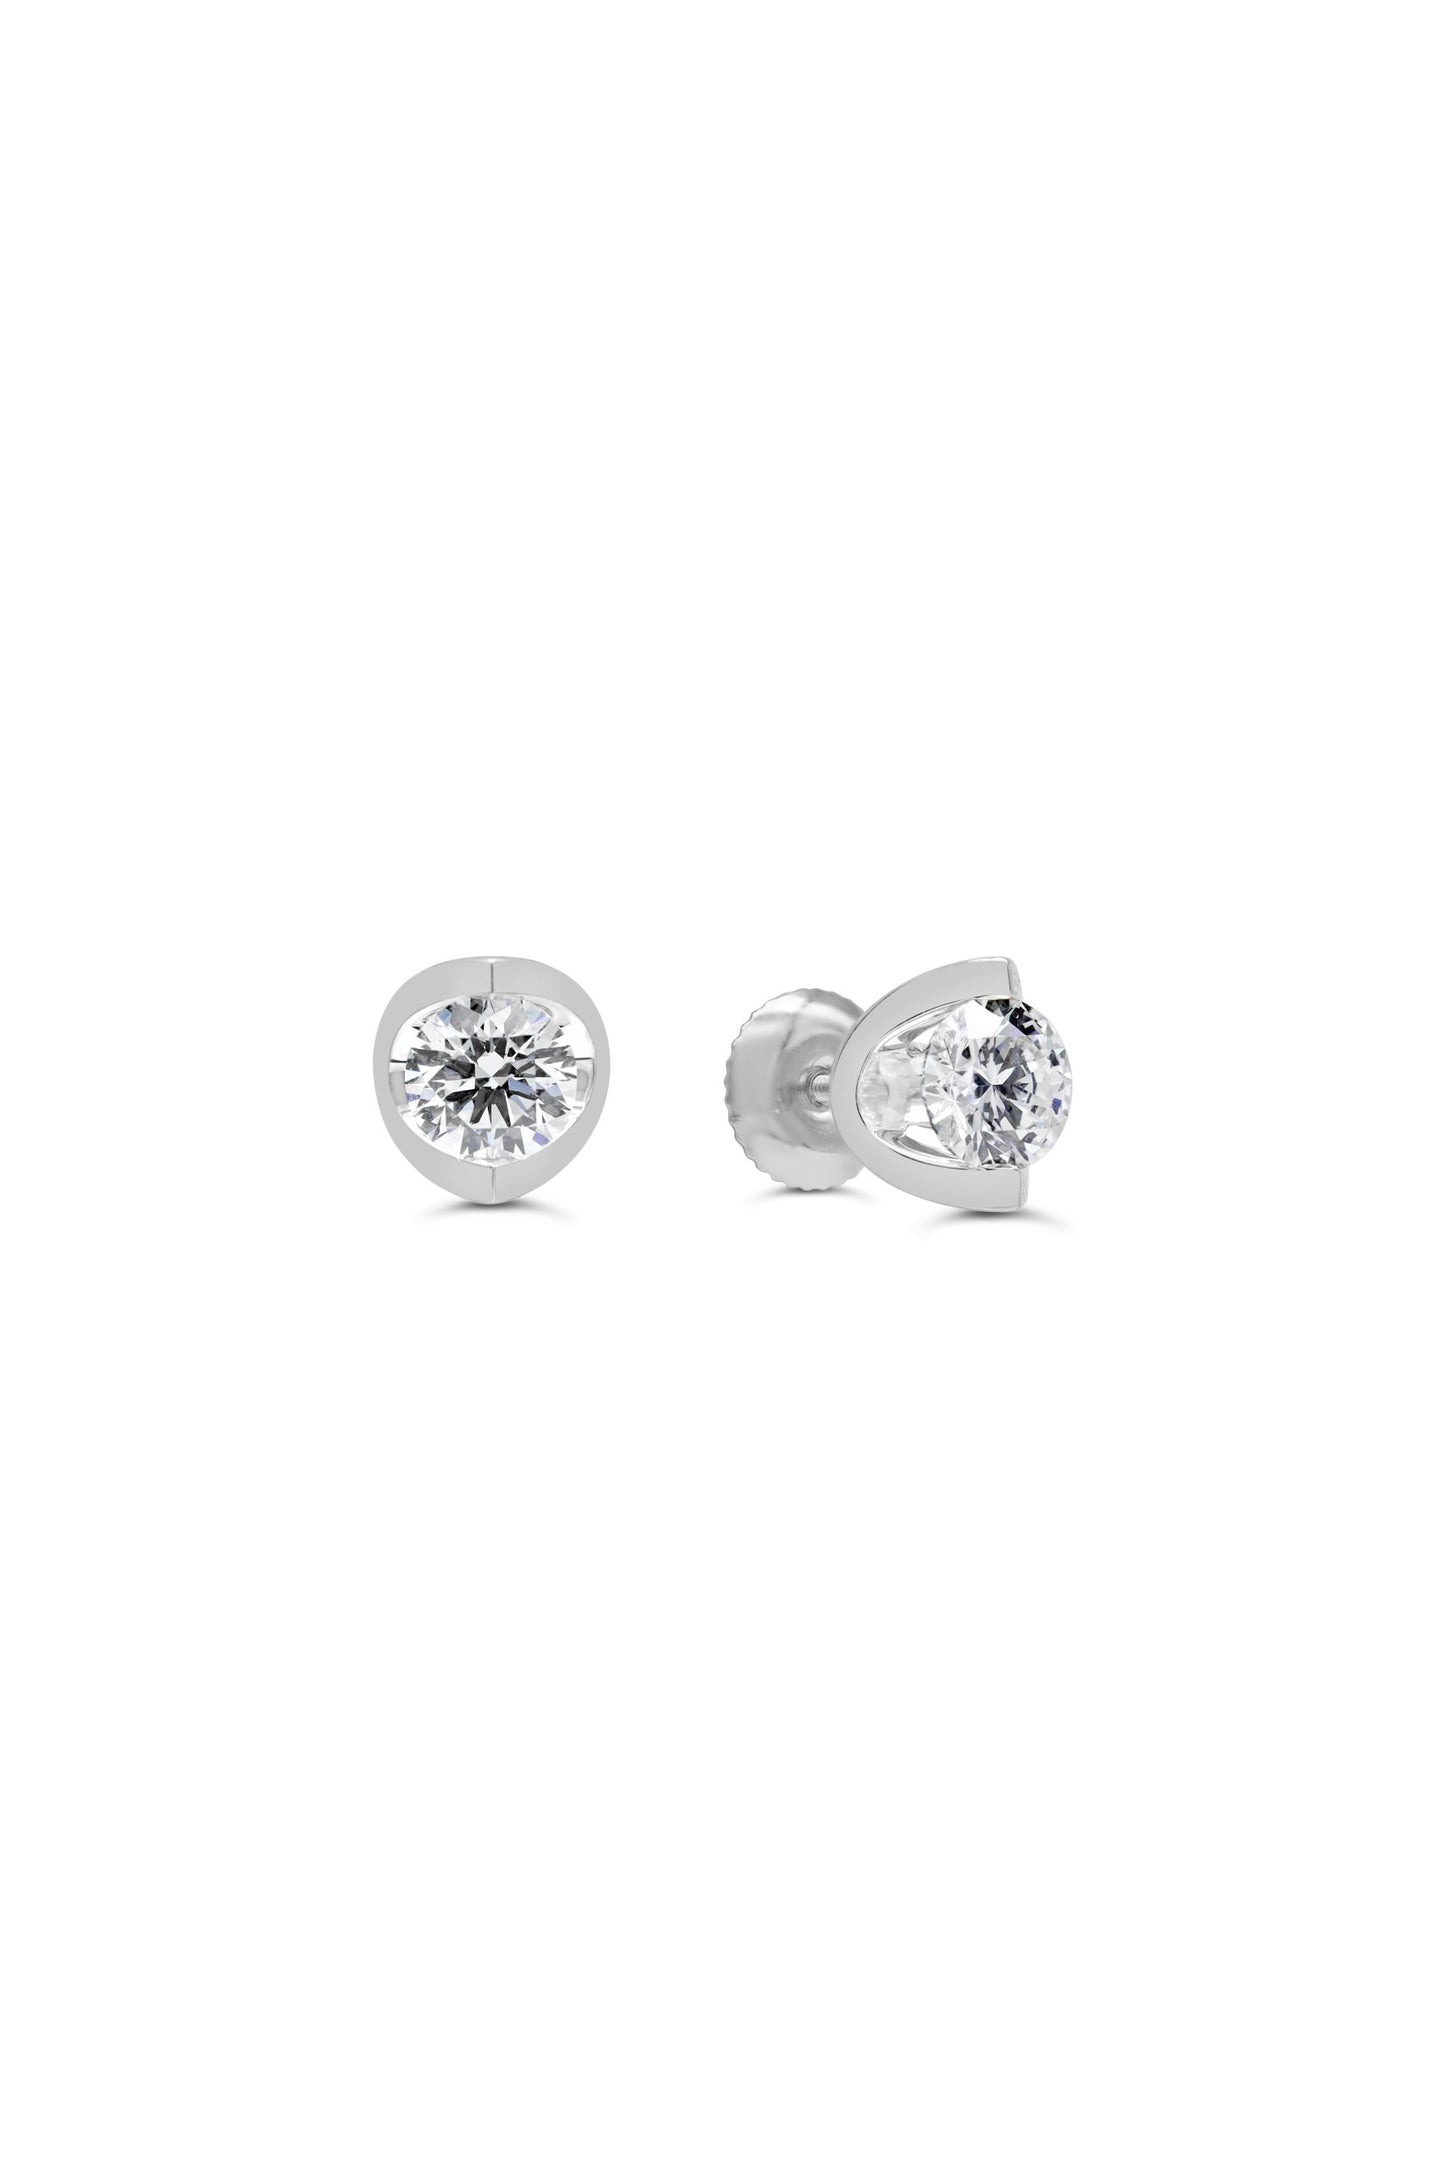 Green Leaf Lab Grown Diamond Earrings 14K White Gold Half Moon Collection Screwback studs- 0.70ct